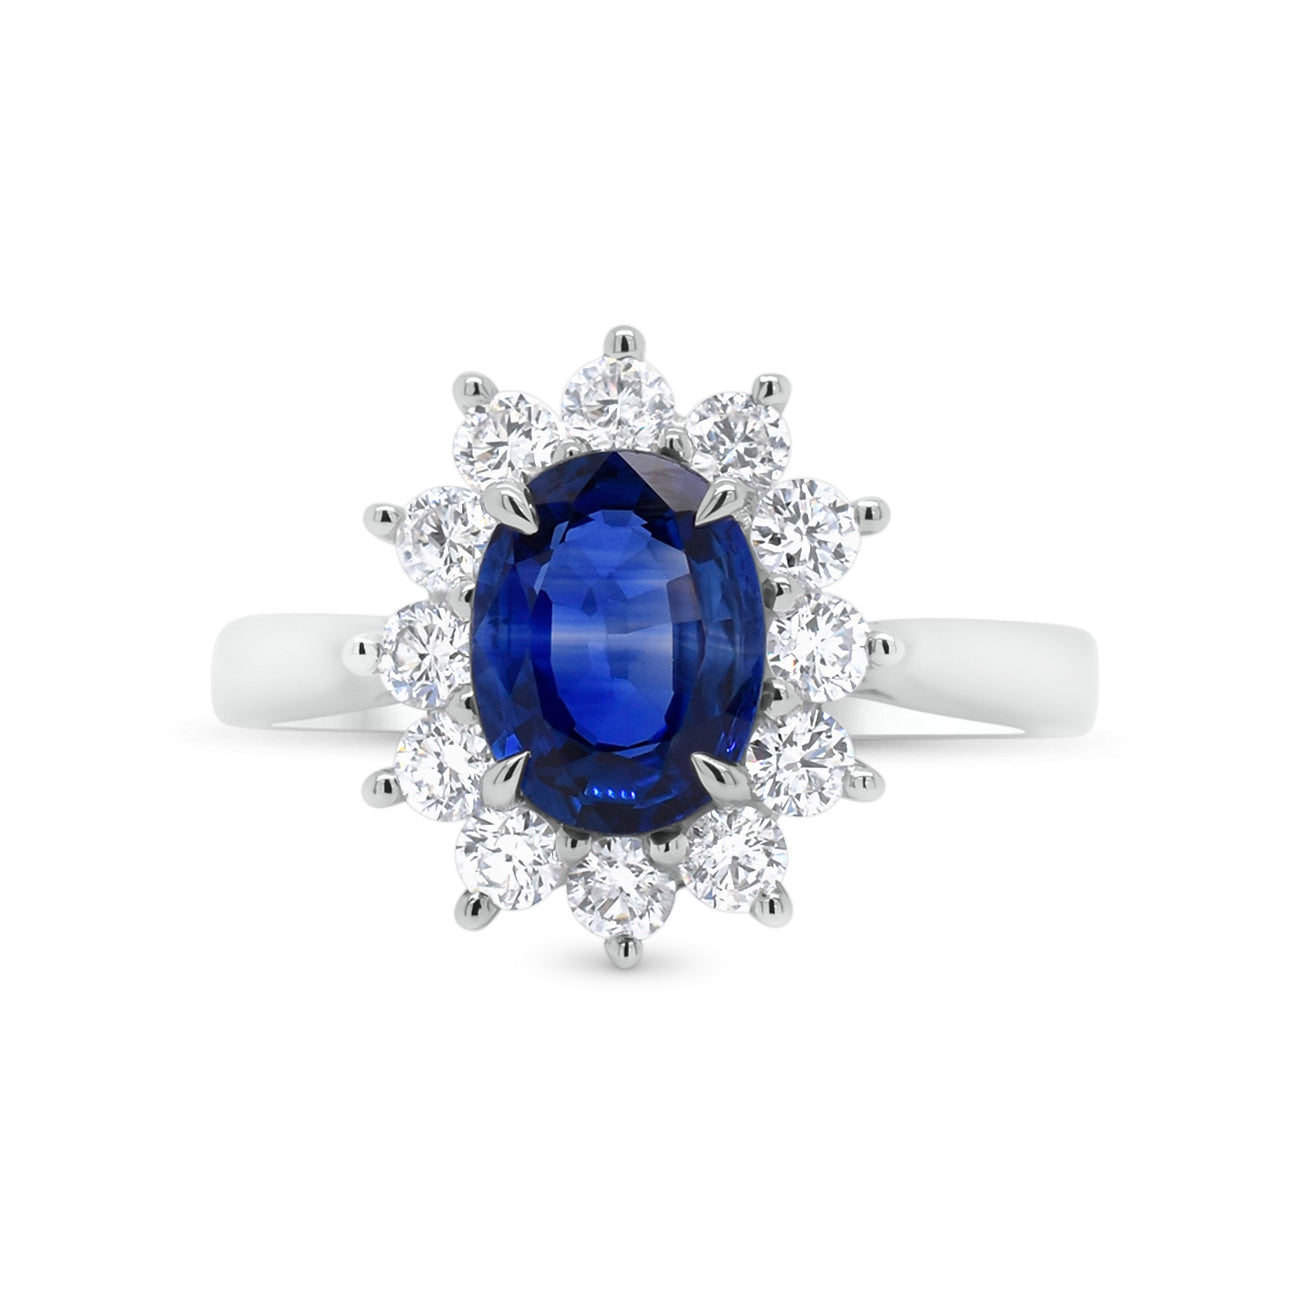 Sapphire & diamond classic ring - 18K gold weighing 3.32 grams  - 12 round diamonds totaling 0.58 carats  - 1.61 ct sapphire